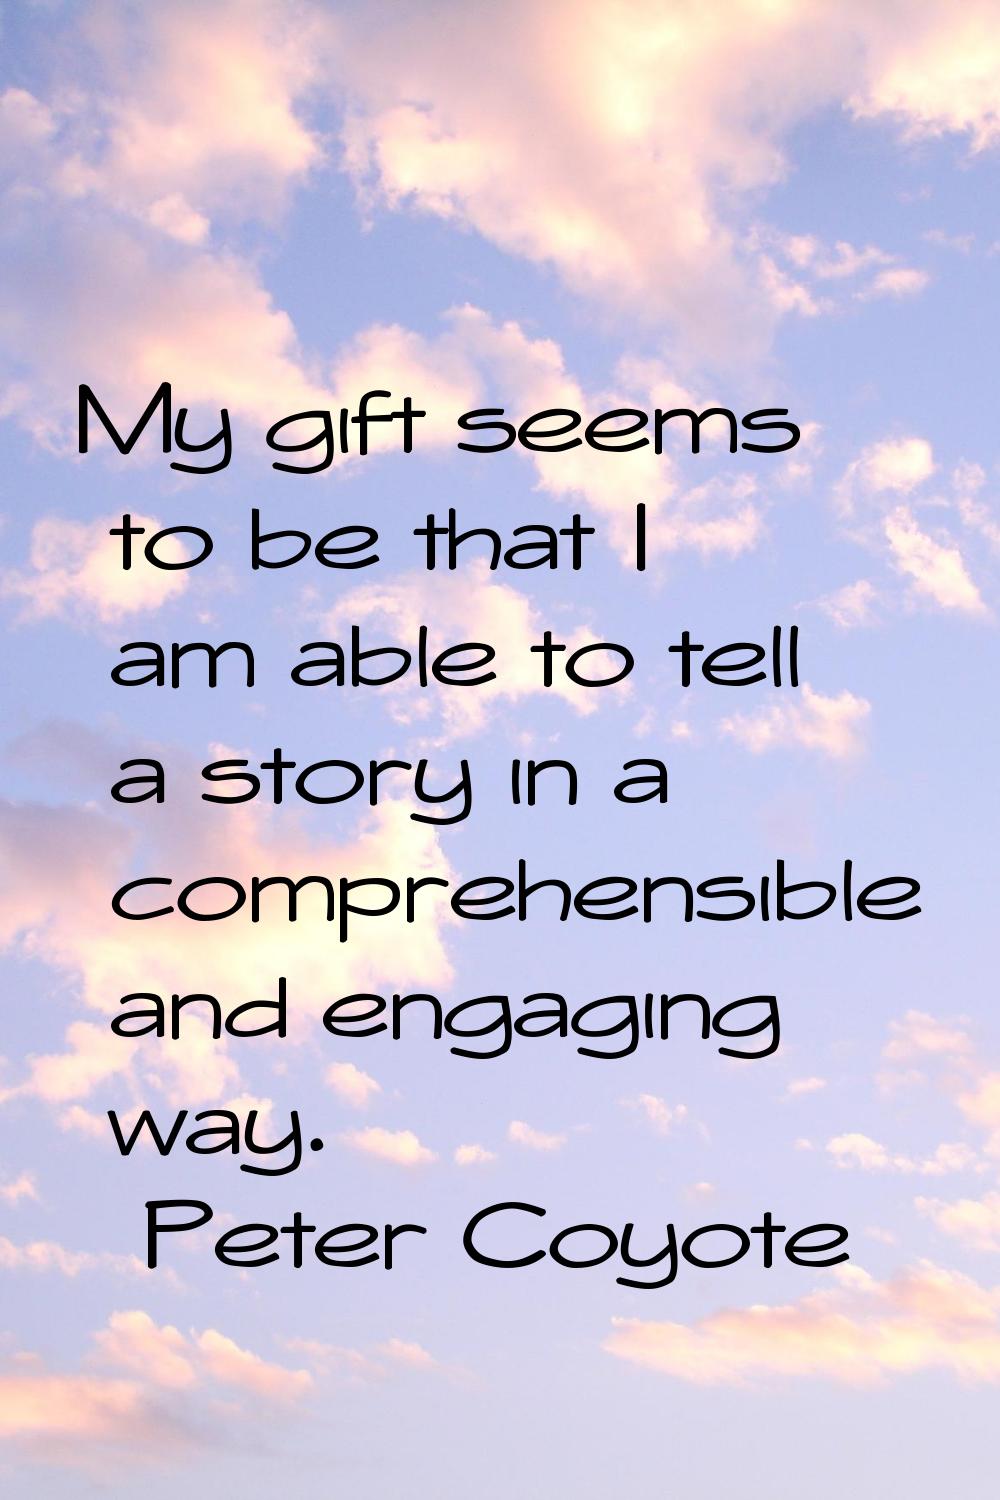 My gift seems to be that I am able to tell a story in a comprehensible and engaging way.